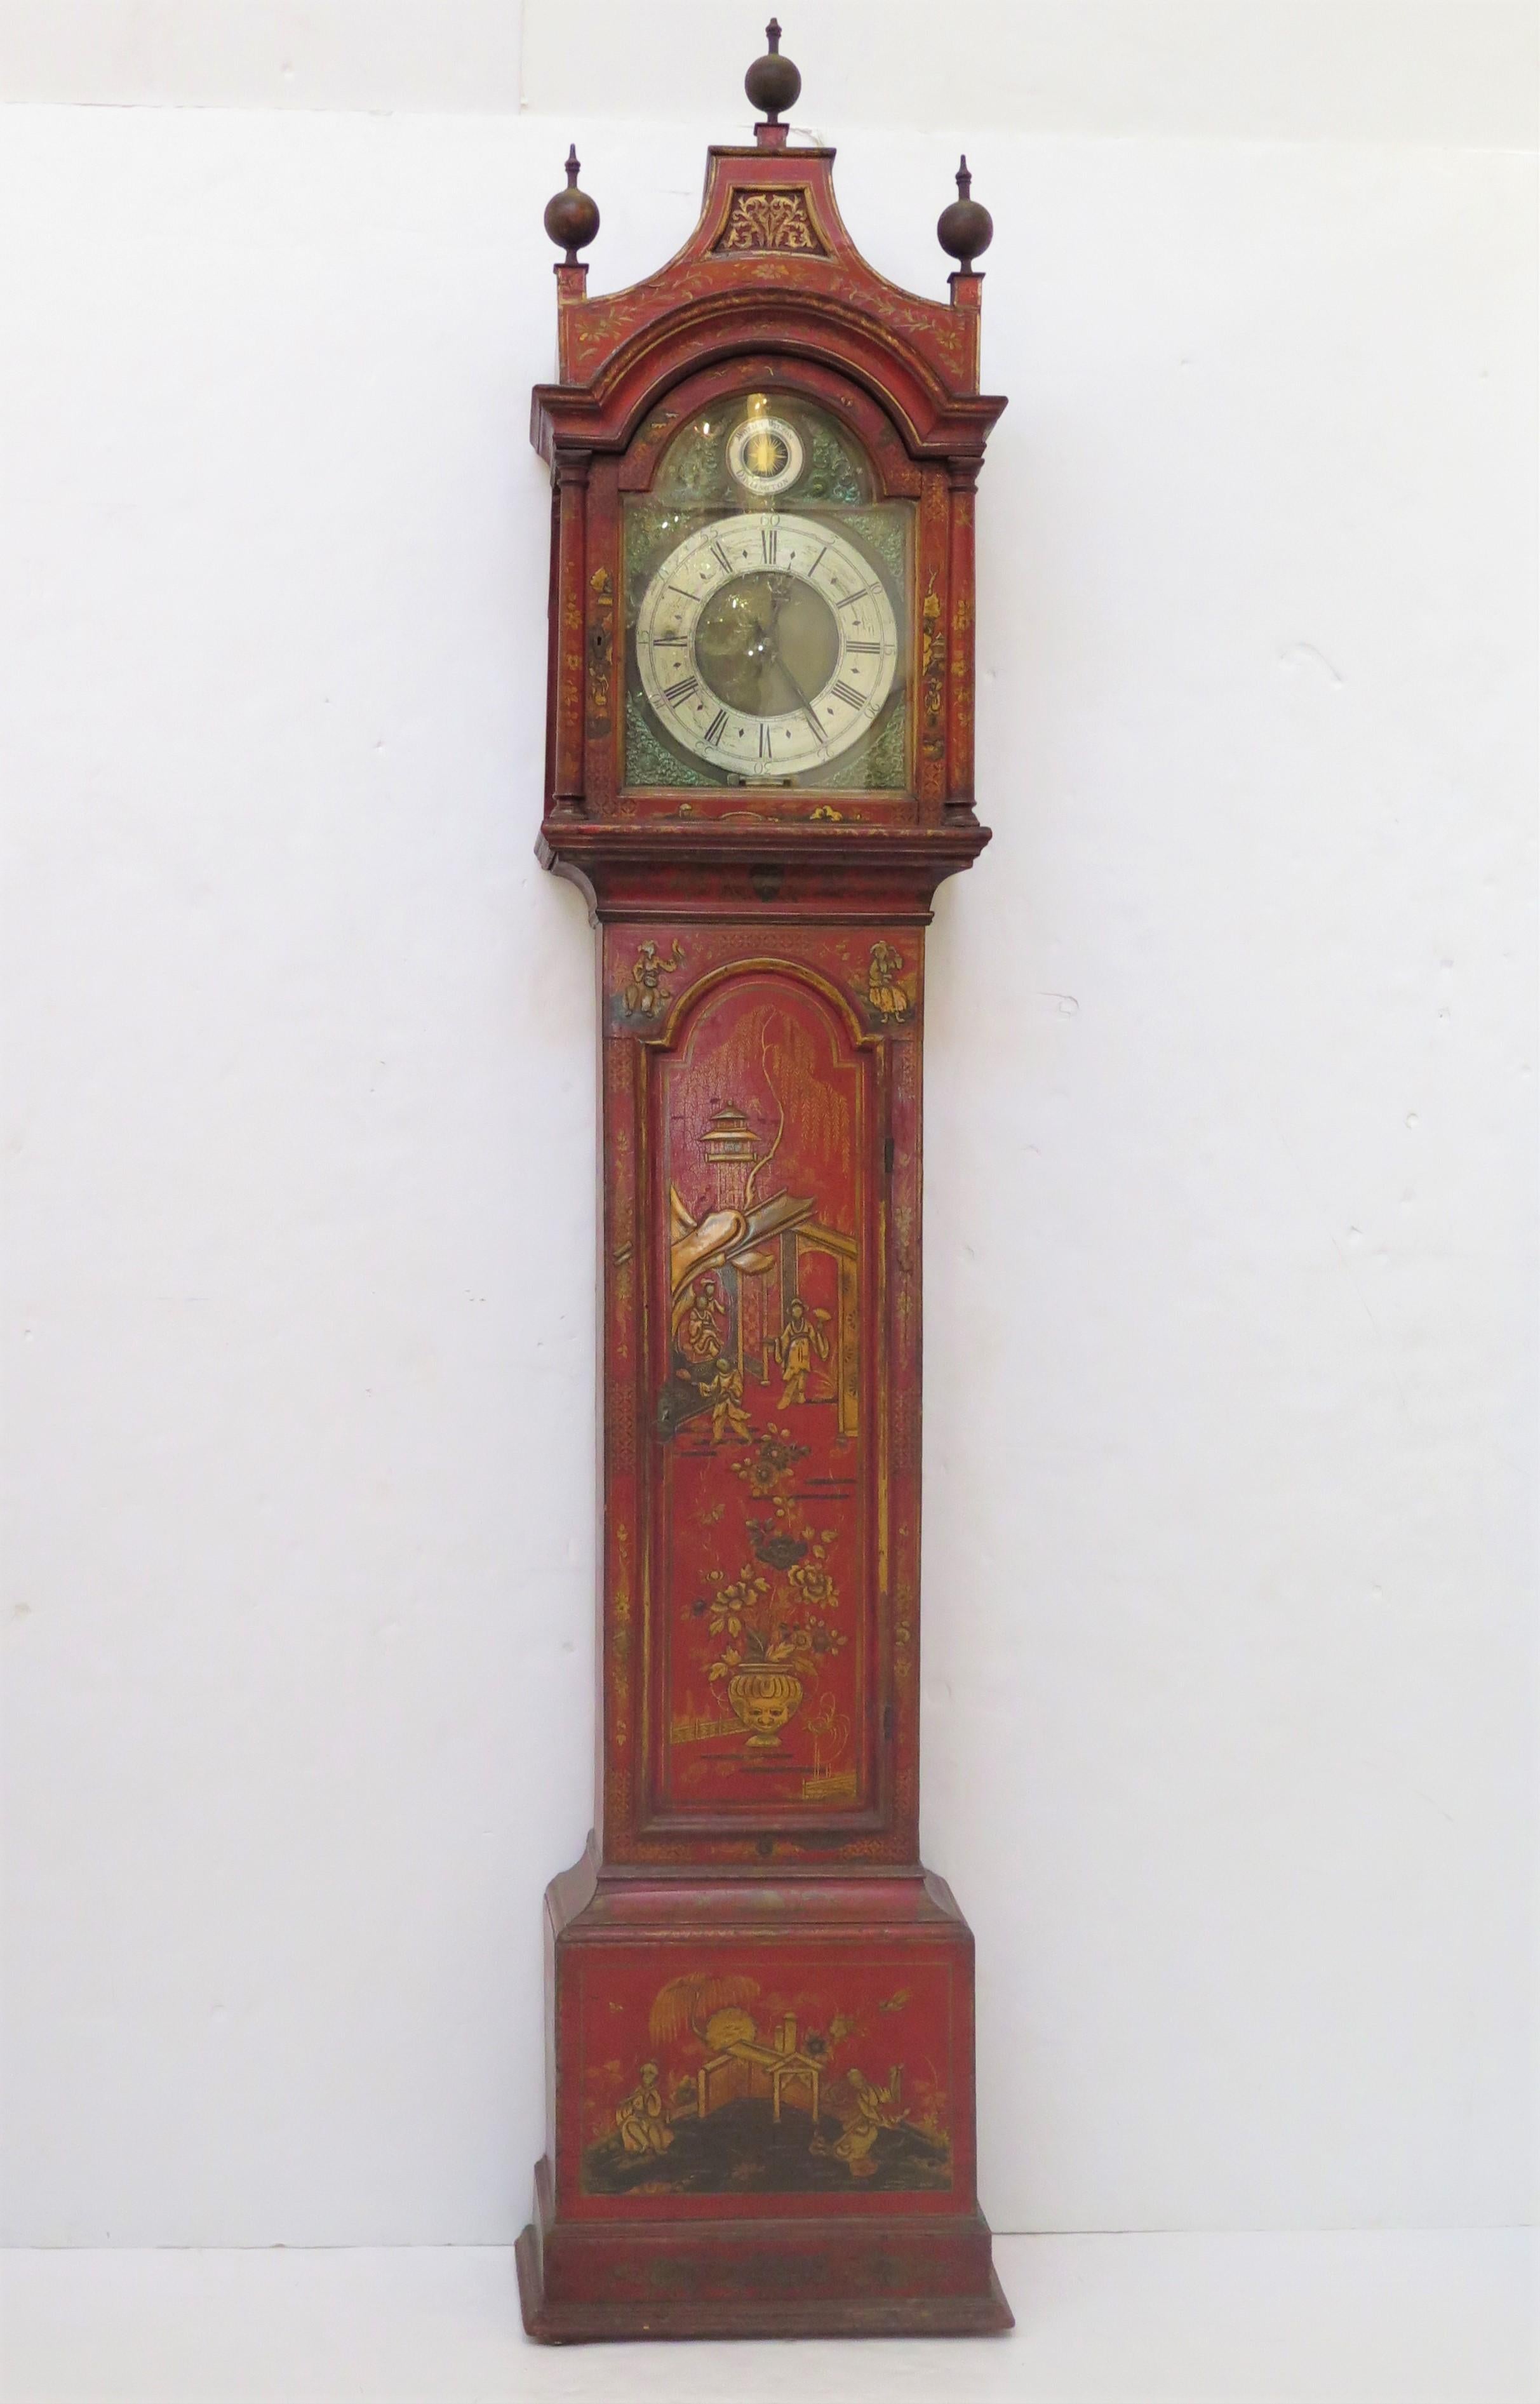 Georgian red-lacquered longcase / tall-case clock with gilt Chinoiserie decoration, marked William Wilson / Darlington with sunburst decoration, brass dial with repousse spandrels and silvered chapter ring with black Roman numerals; includes built